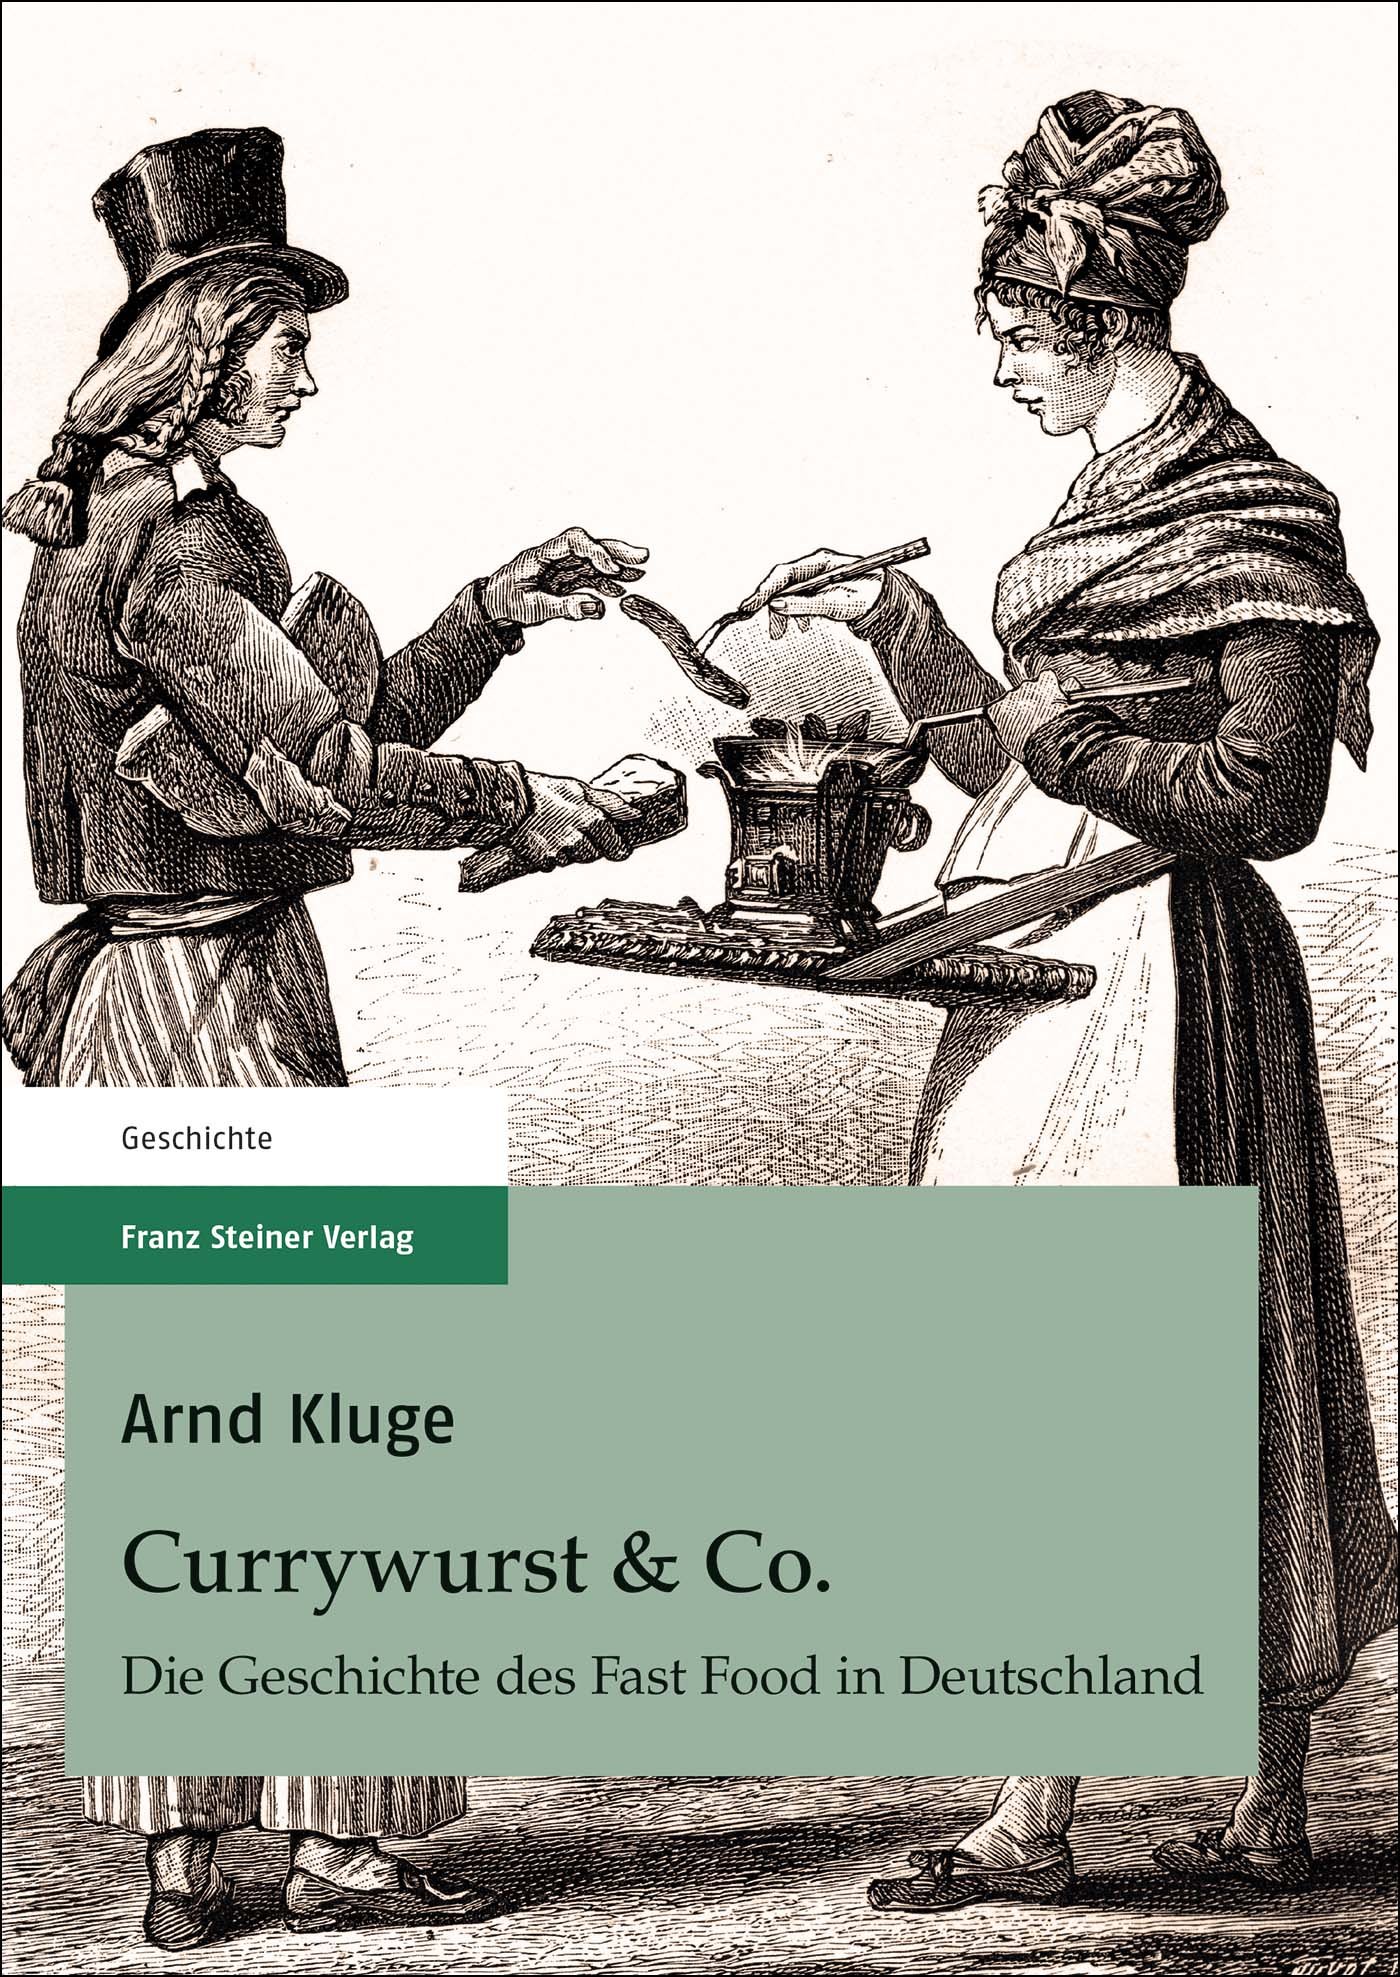 Currywurst & Co.